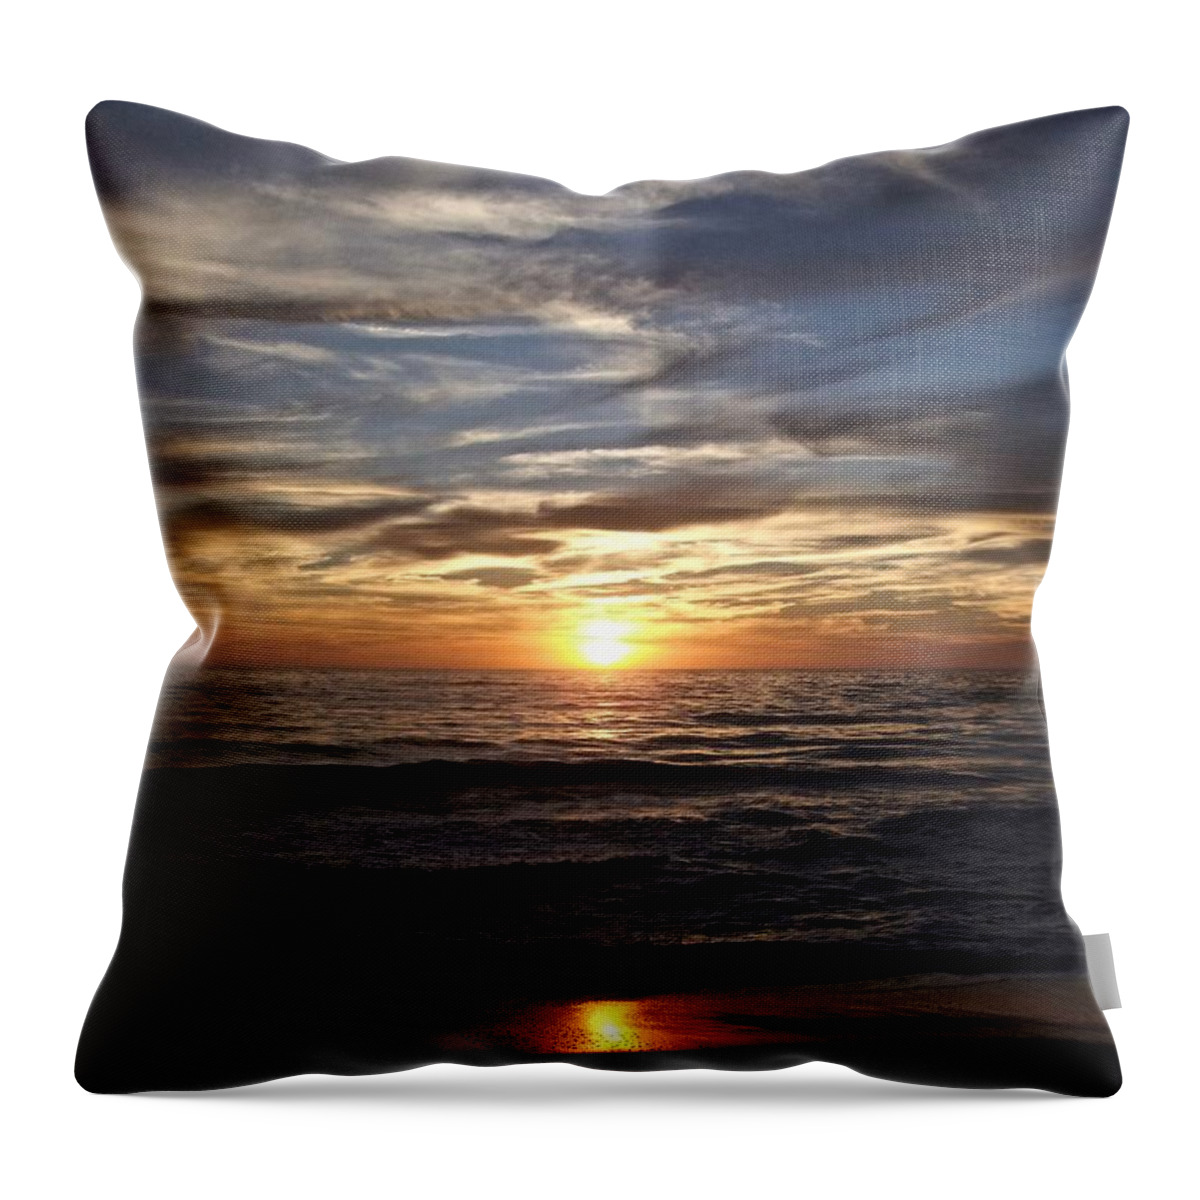 Sunset Over The Ocean Throw Pillow featuring the photograph Sunset Over The Ocean by Kathy Chism